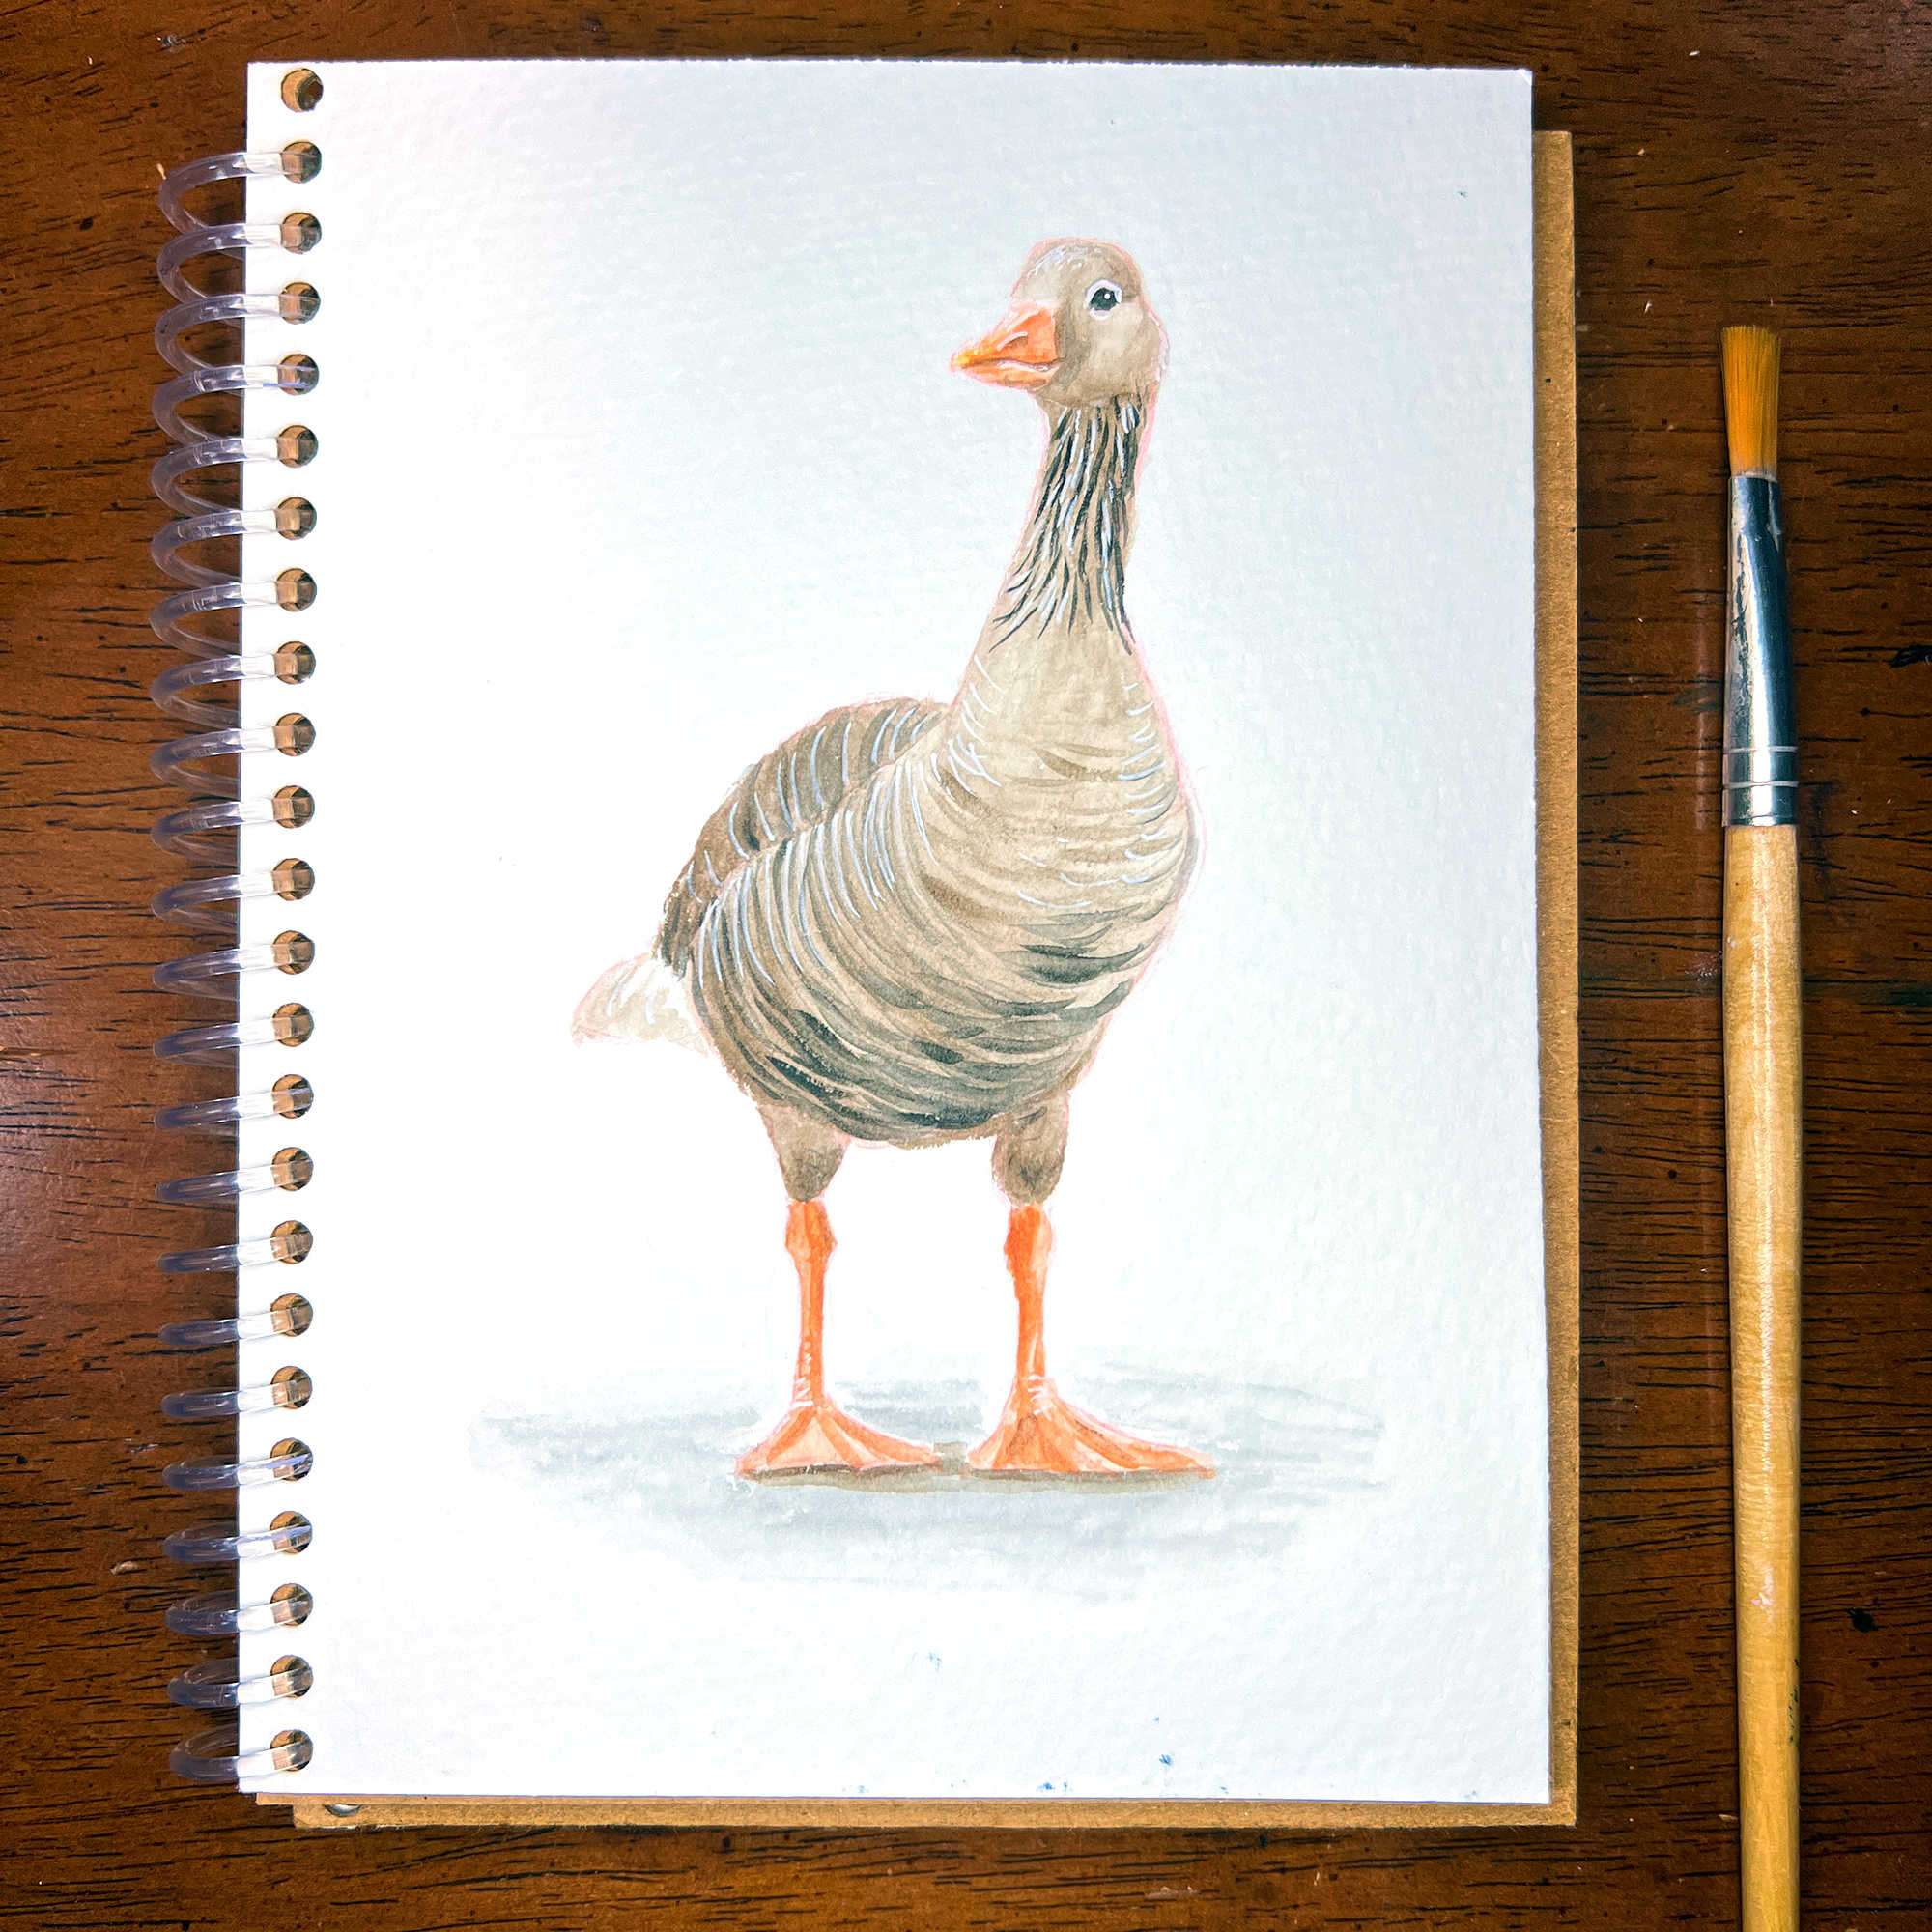 Watercolor sketch of a goose on a notepad next to a paintbrush.